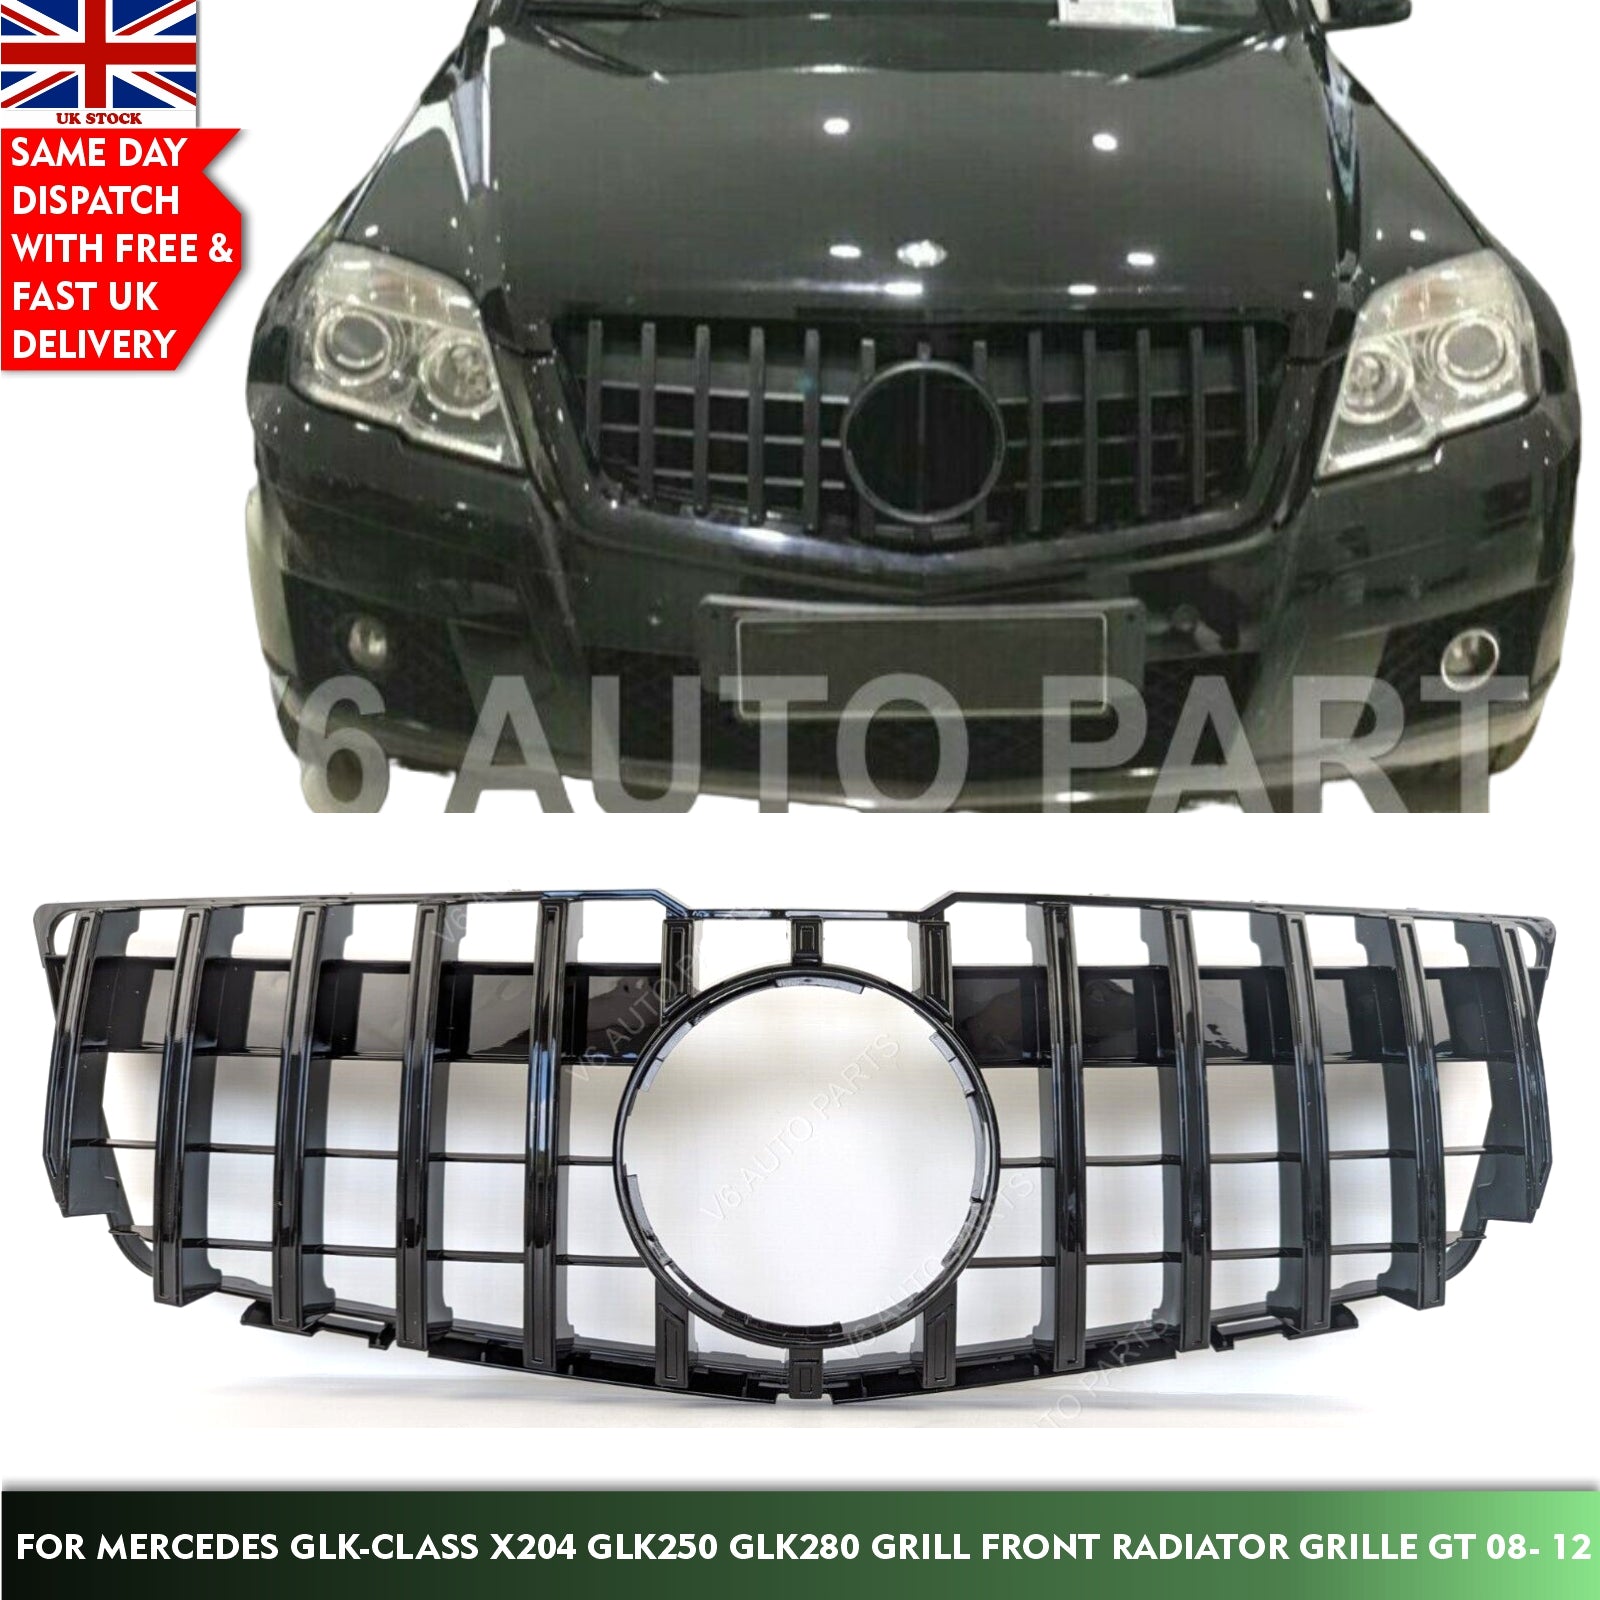 For Mercedes GLK-Class X204 GLK250 GLK280 Grill Front Radiator Grille GT 08- 12